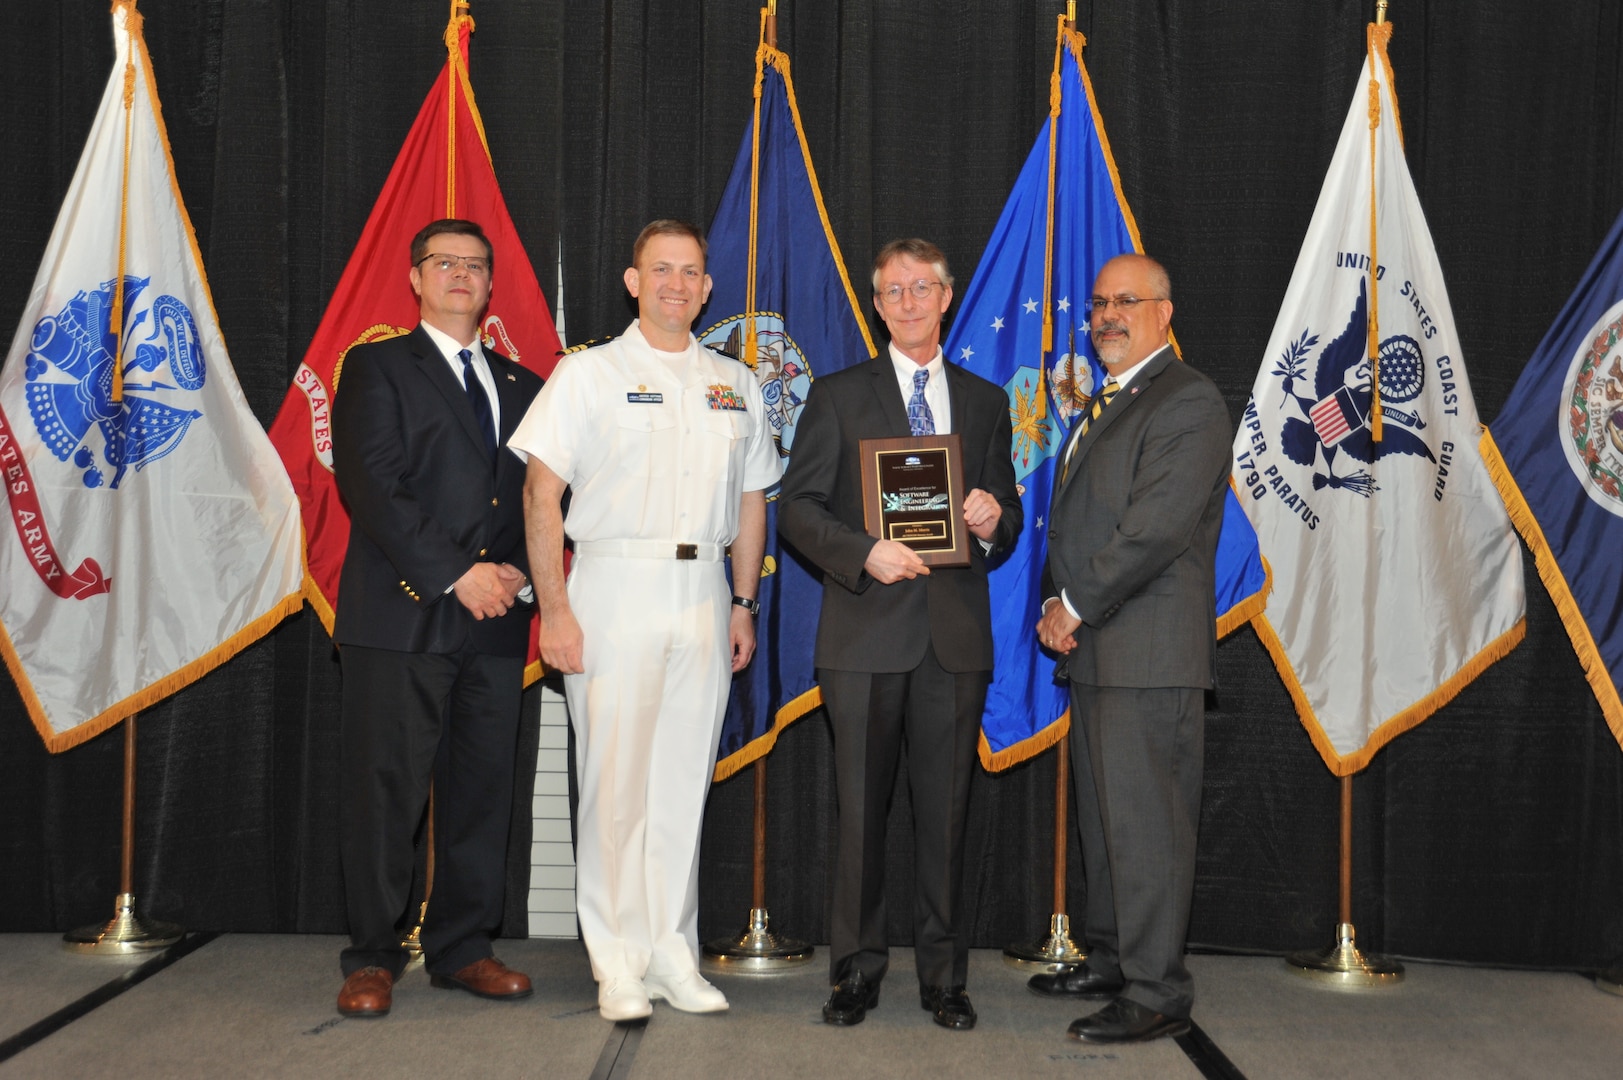 IMAGE: John Morris is presented the  NSWCDD Award of Excellence for Software Engineering and Integration at Naval Surface Warfare Center Dahlgren Division's annual awards ceremony, Apr. 26 at the Fredericksburg Expo and Conference Center.

The NSWCDD Award of Excellence for Software Engineering and Integration was established to recognize individuals who have made a notable and significant impact to NSWCDD through their outstanding performance in Software Engineering & Integration.